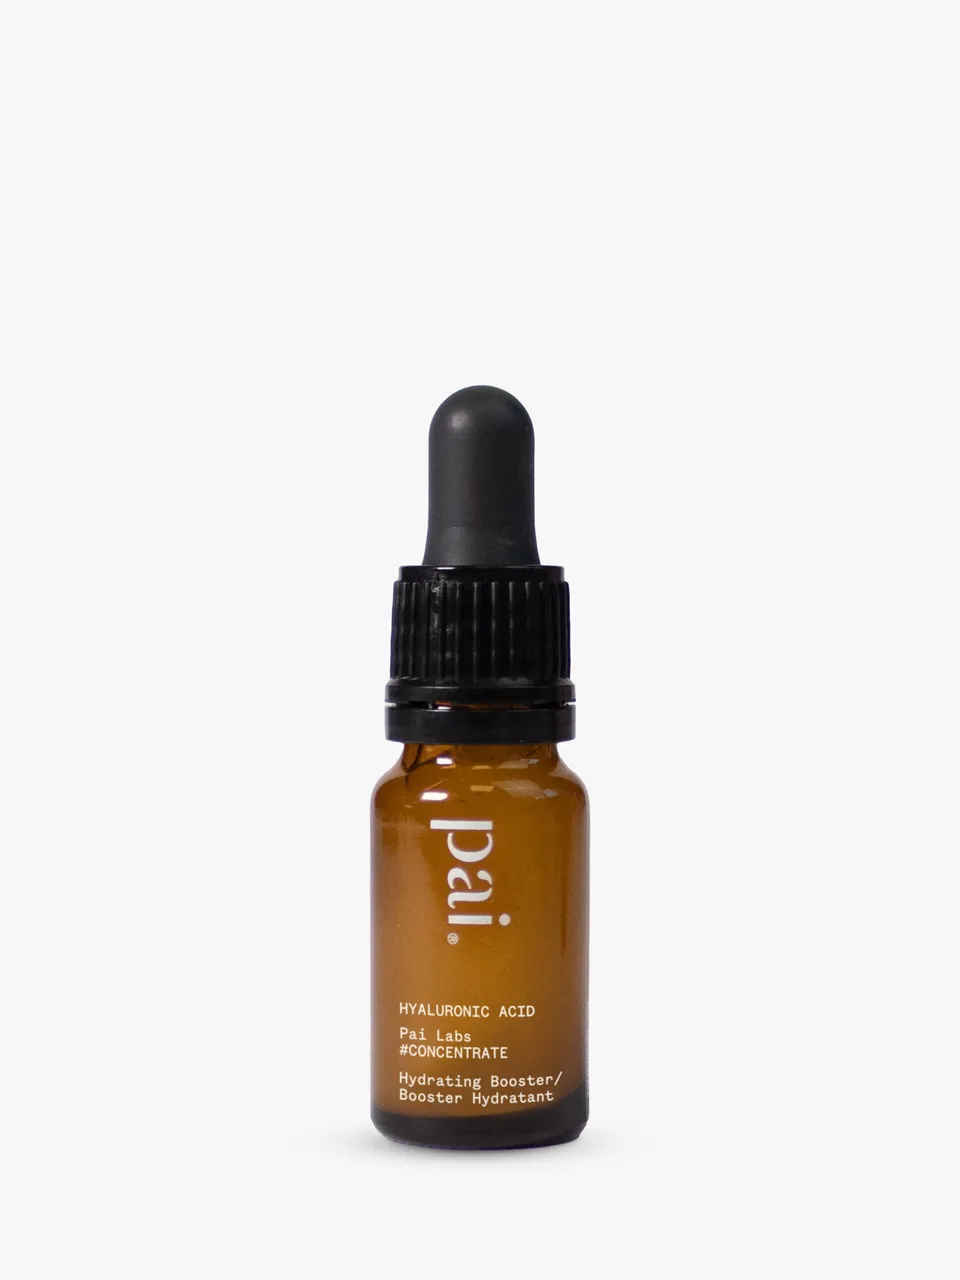 Pai Hyaluronic Acid Hydrating Booster 0.3%, 70ml - Unisex - Size: 70ml